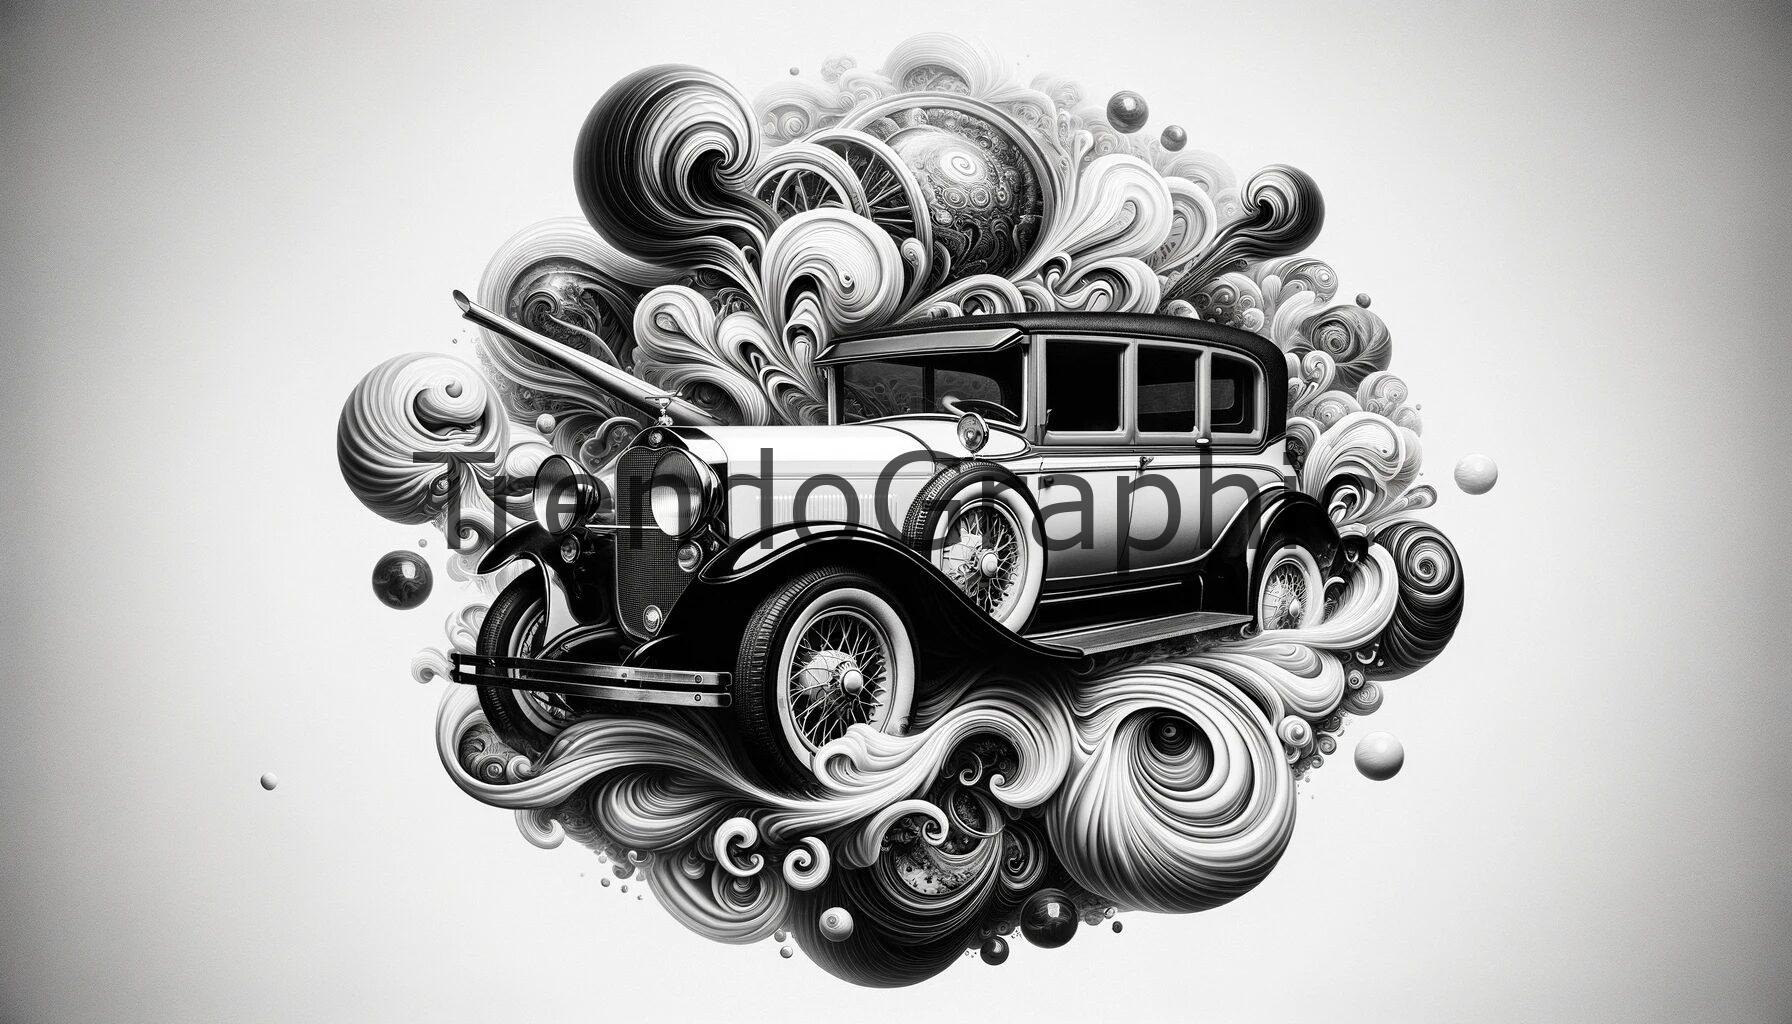 Timeless Journey: Surreal Interpretation of a Vintage Car in Black and White